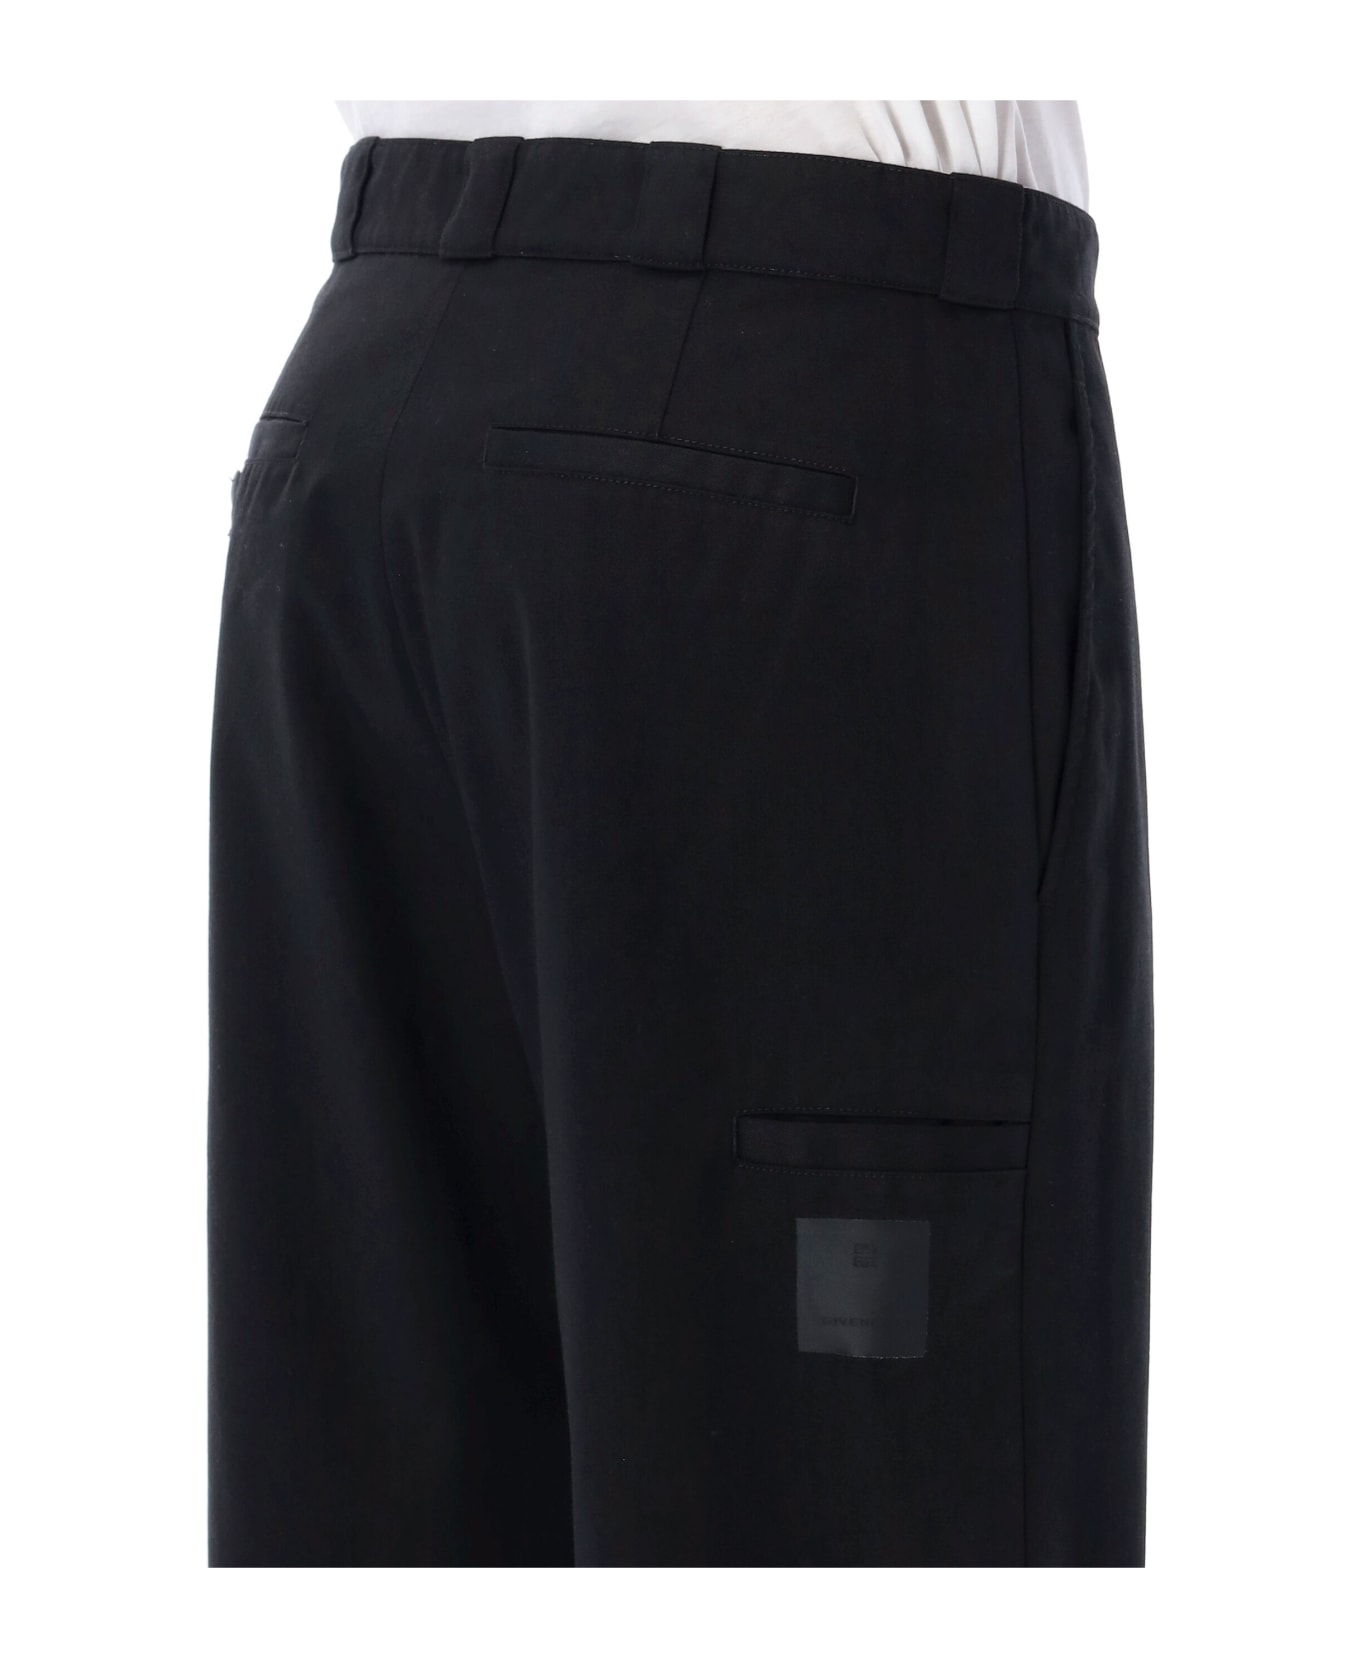 Givenchy Casual Unstiched Pant - Black ボトムス